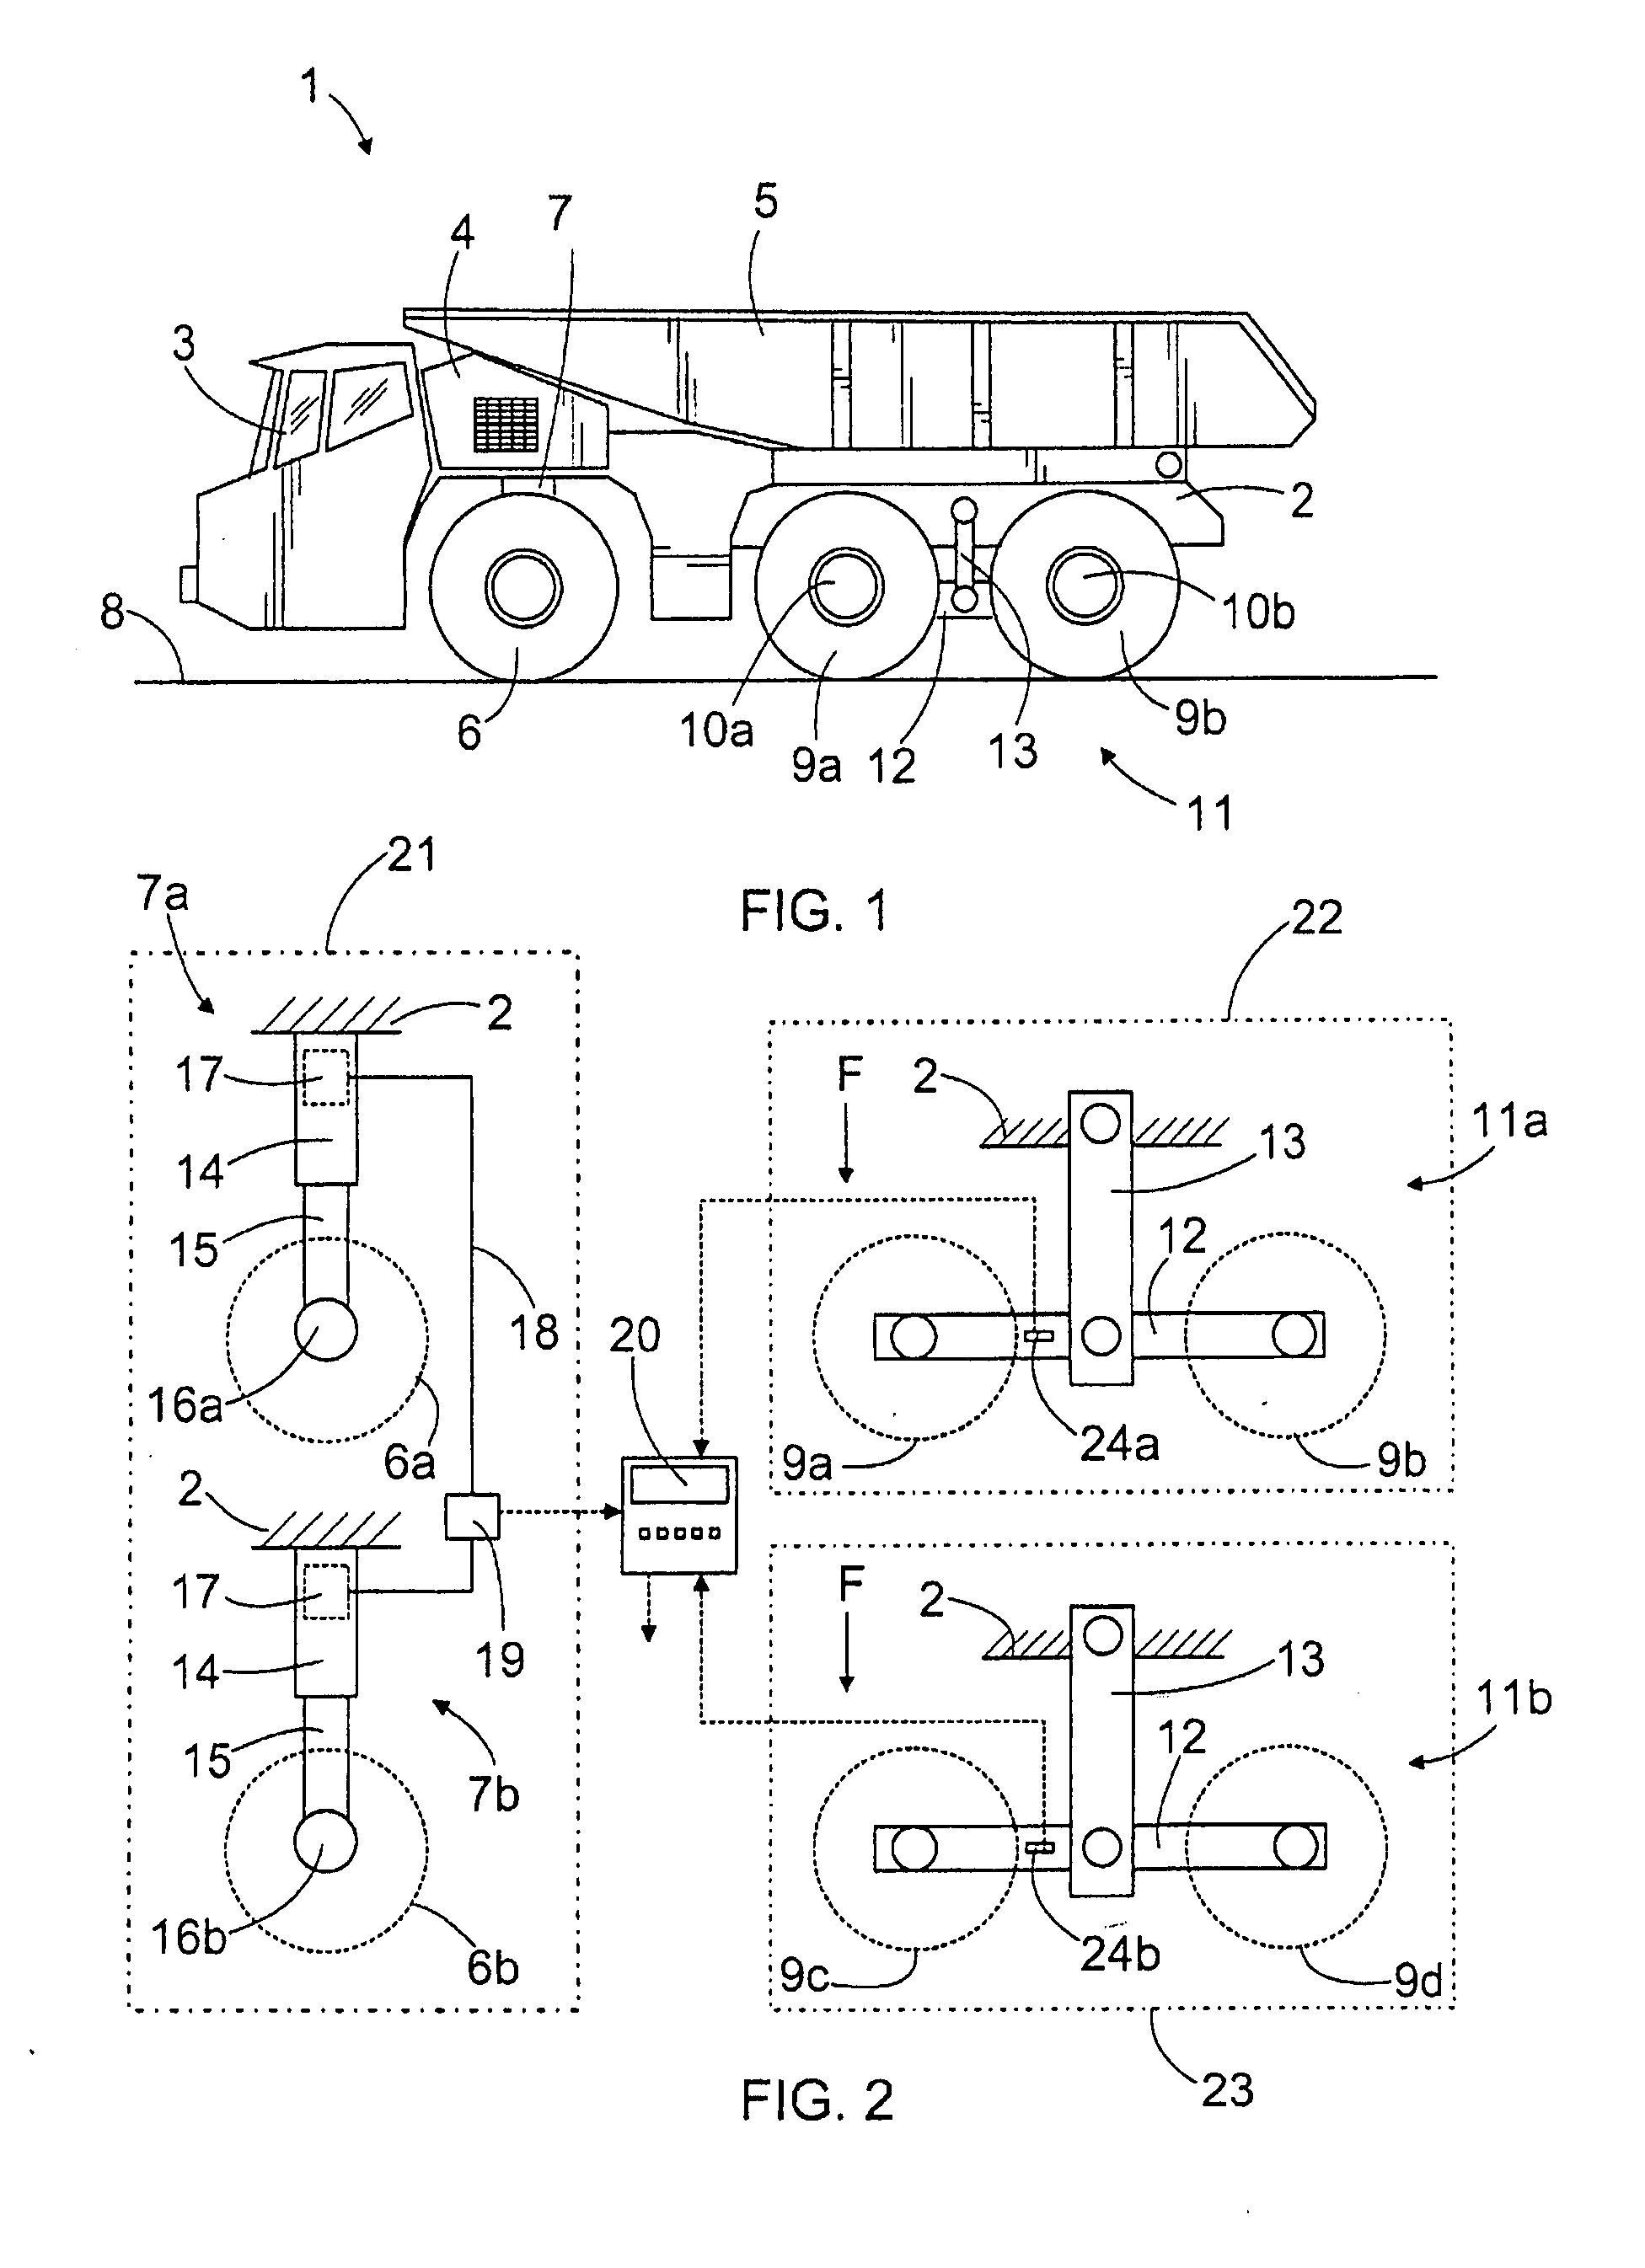 Arrangement for Weighing Transport Vehicle Load